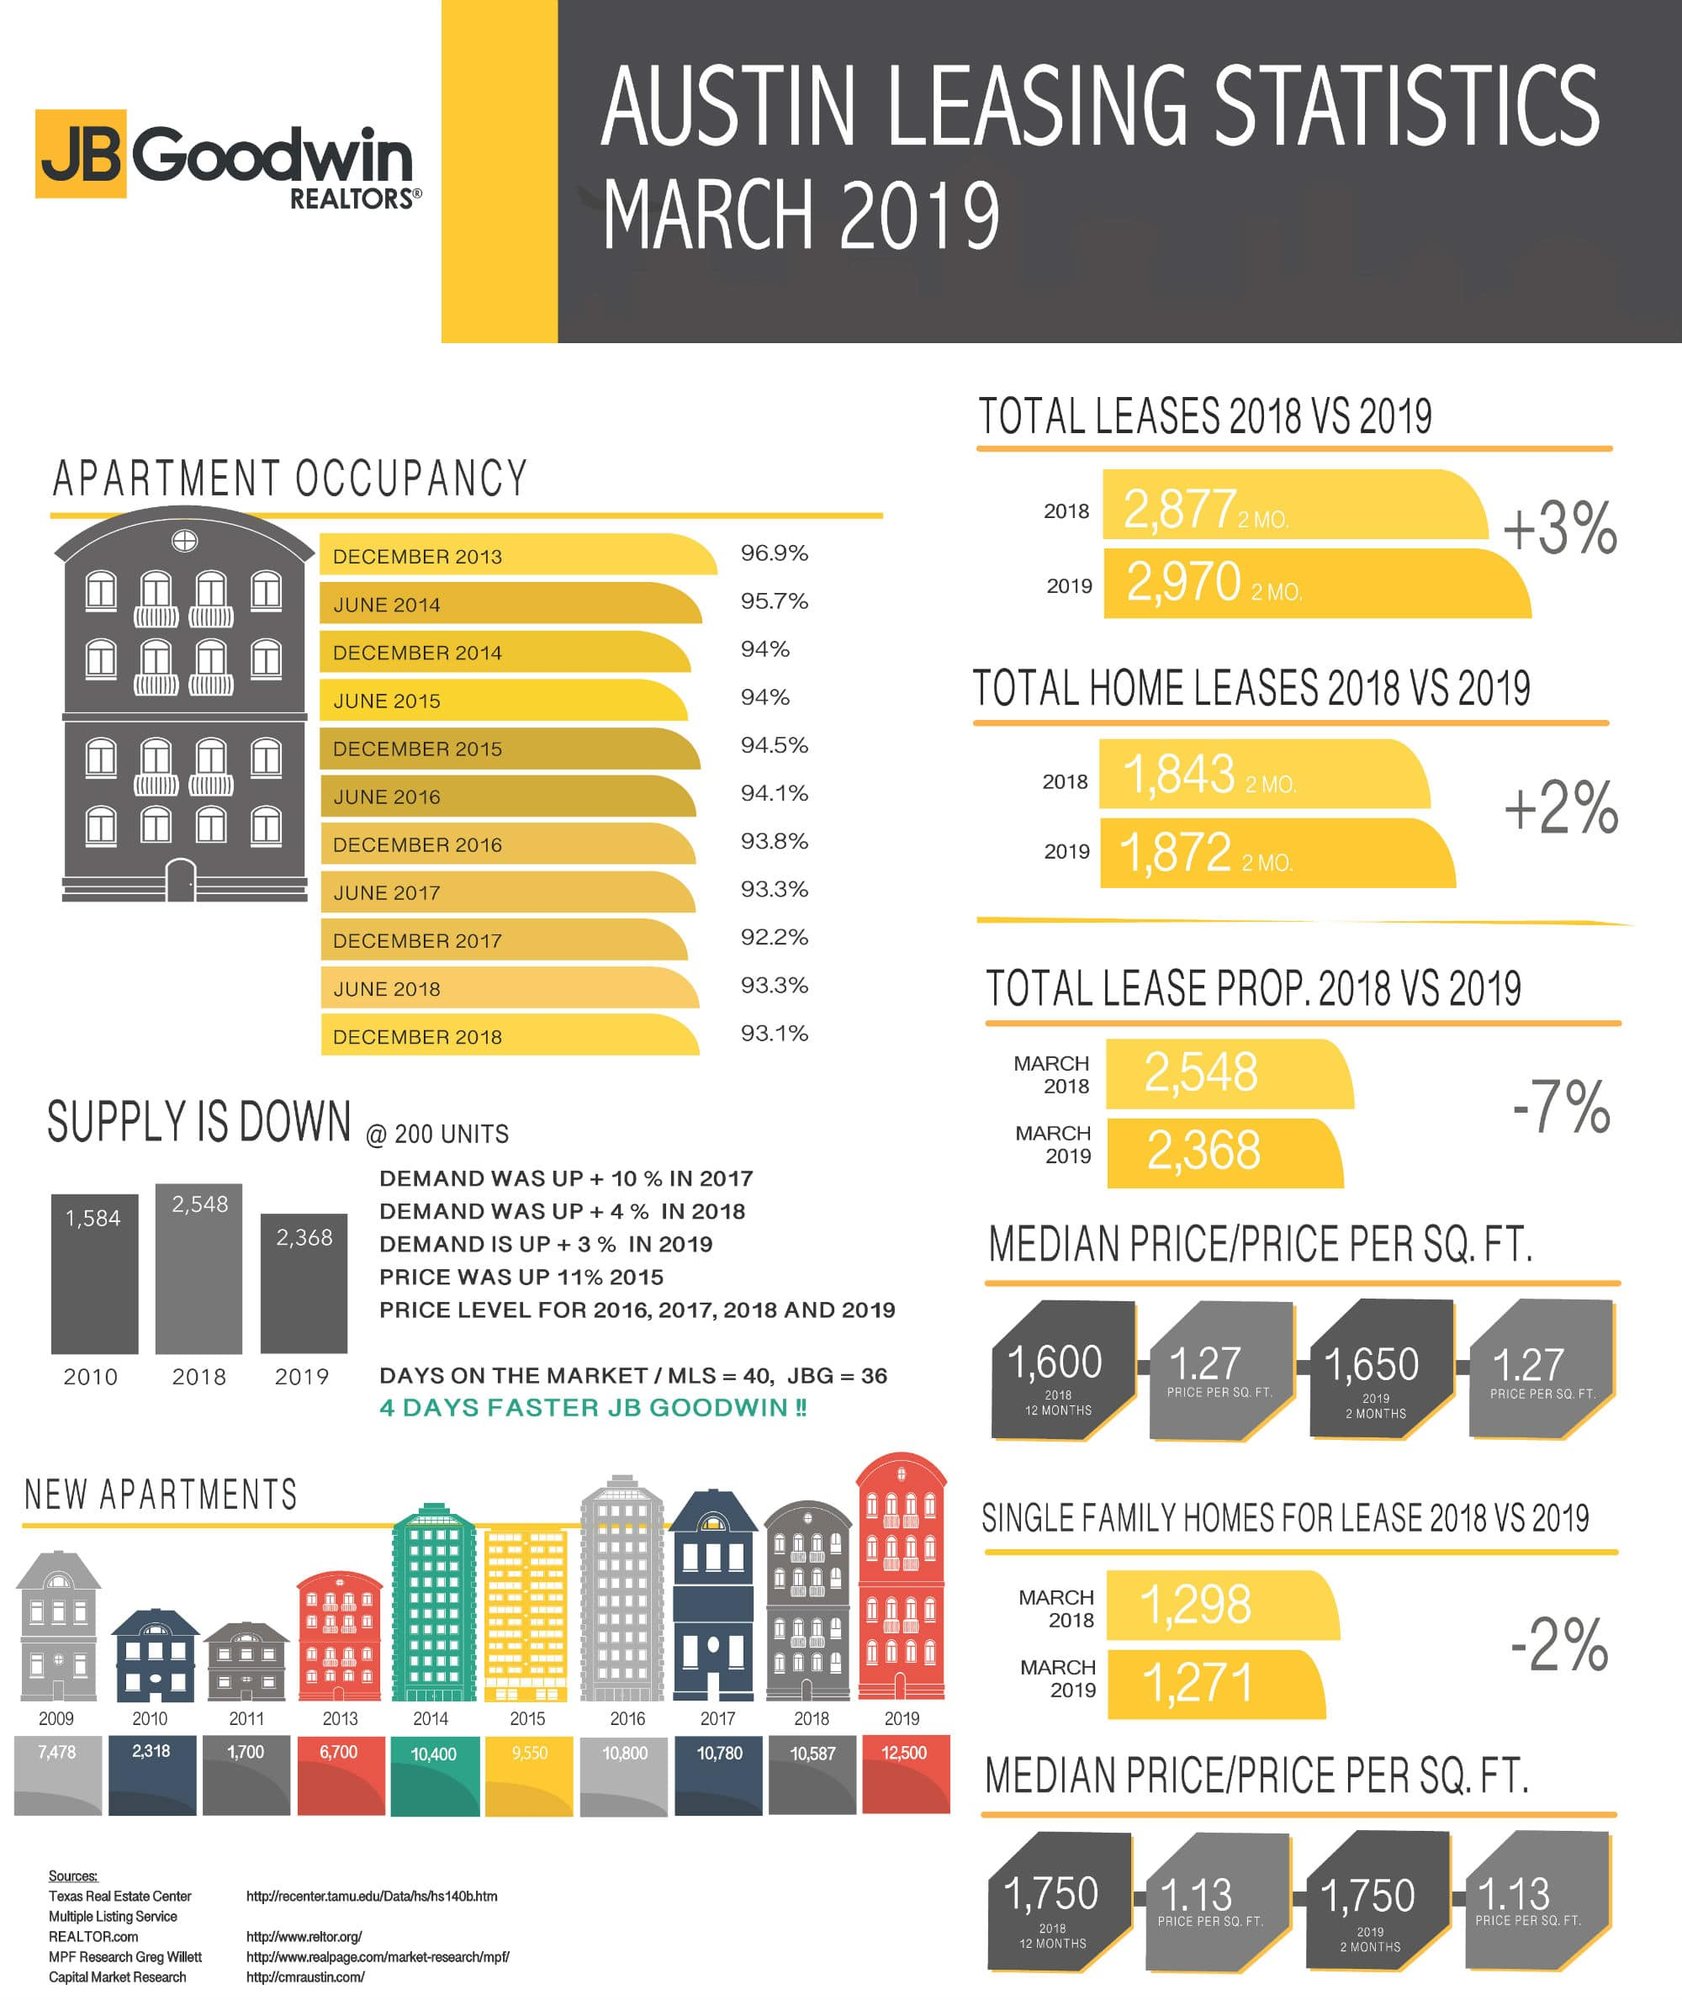 jb goodwin austin leasing stats for march 2019